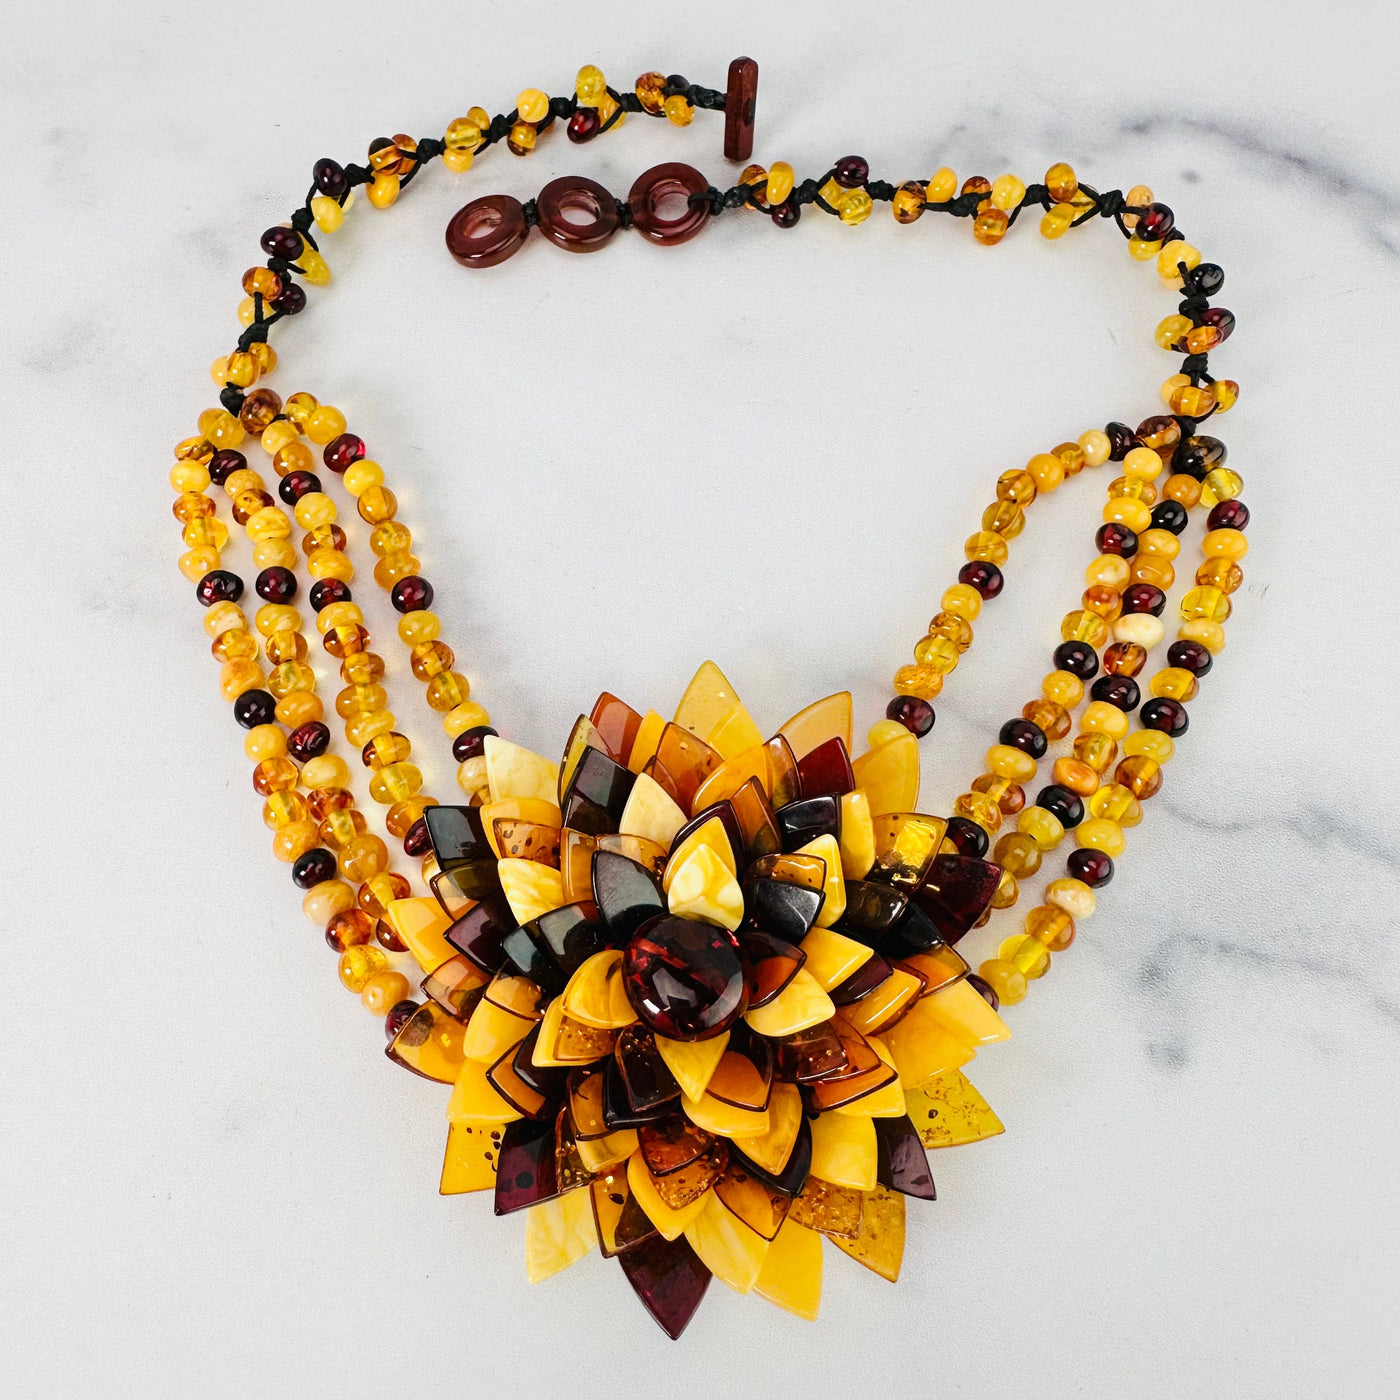 Frontal view of Multi-colored Baltic Amber Beaded Flower Necklace shown on a marble surface with closure undone.